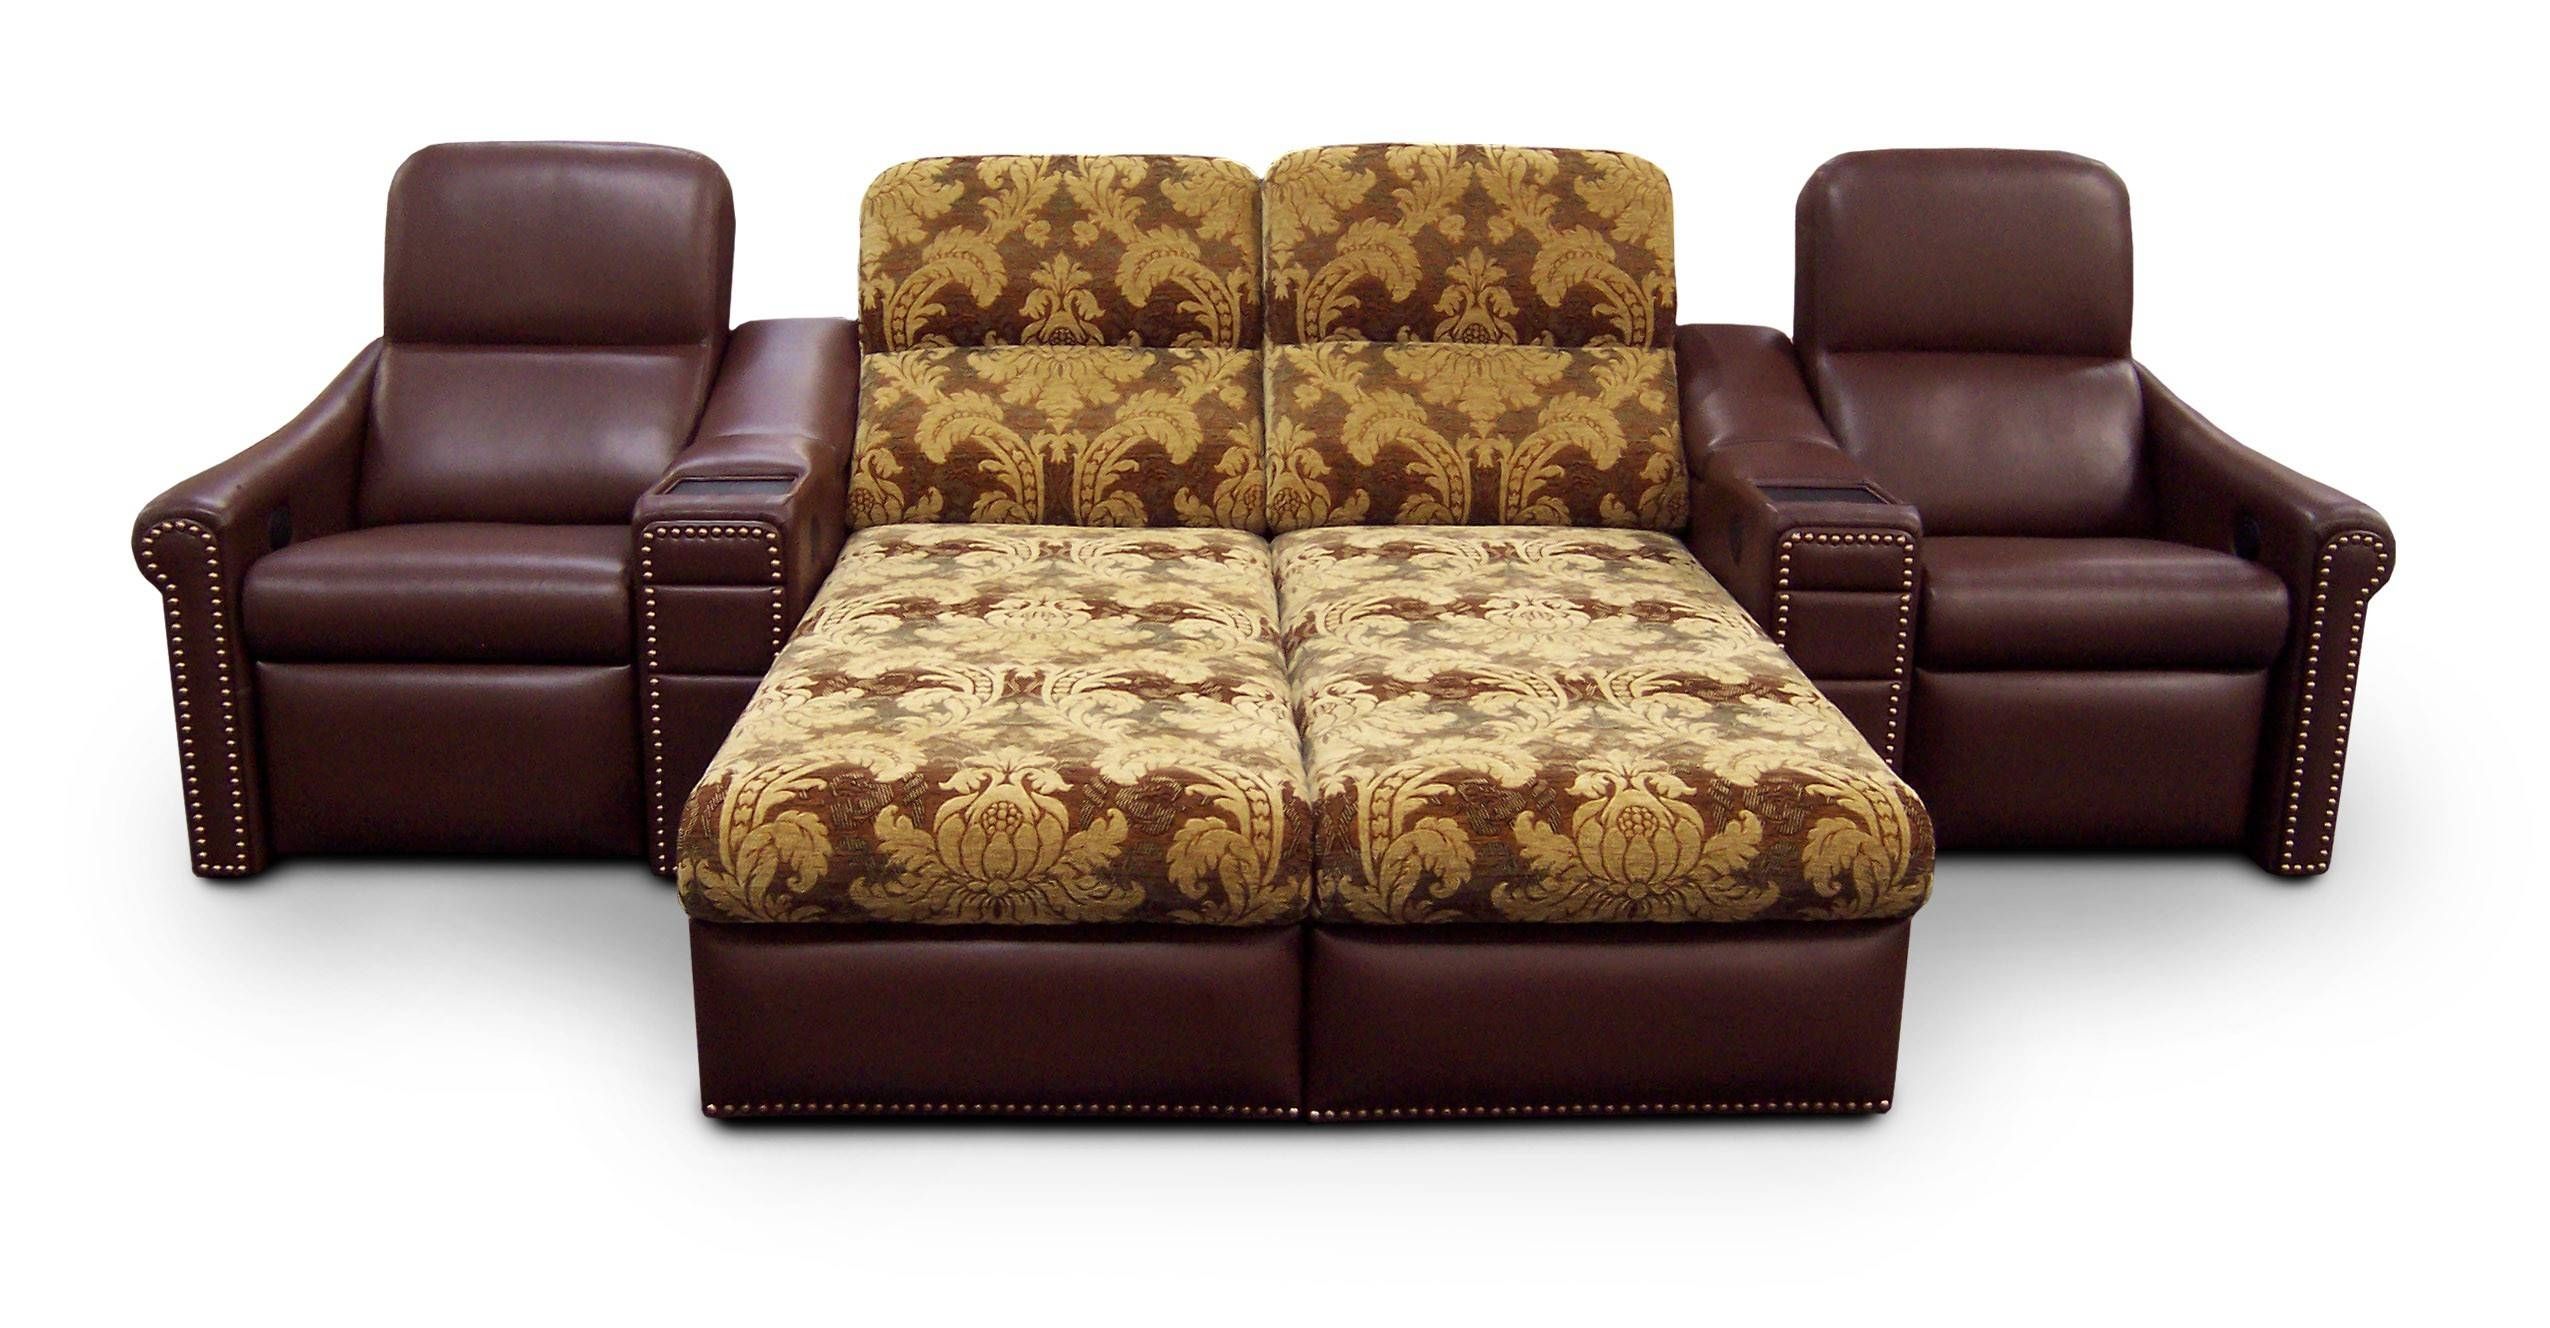 Sofas Center Double Chaise Lounge Sectional Sofa Chair Intended For Chaise Sofa Chairs 